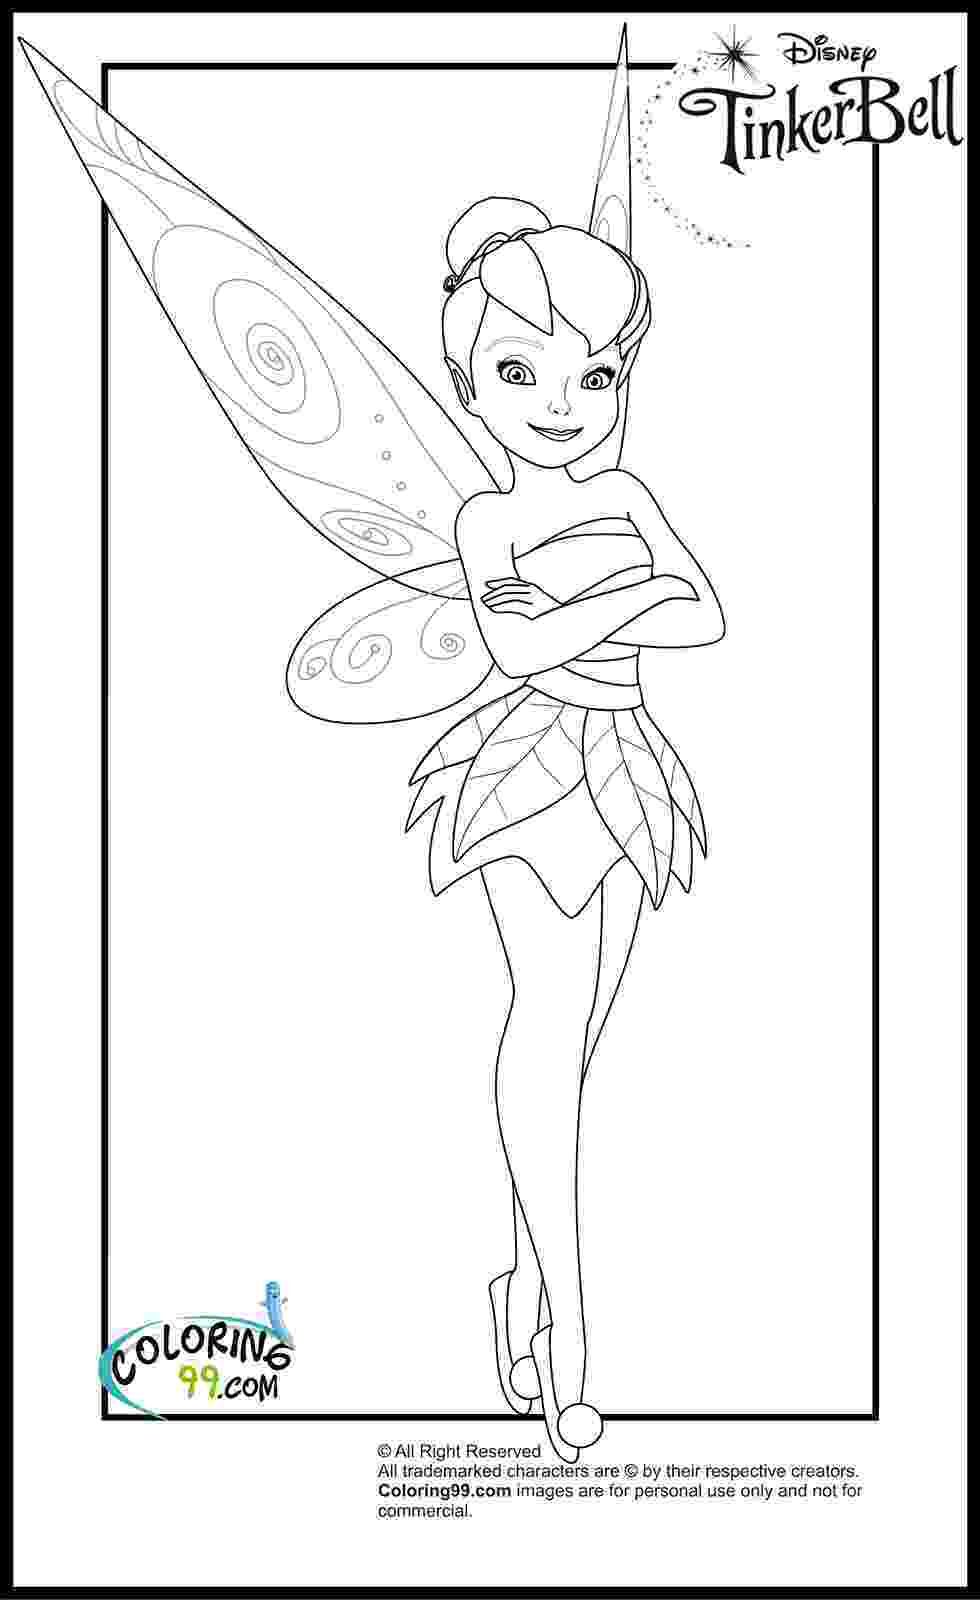 tinkerbell coloring book games 21 best fairies coloring pages images fairy coloring coloring games book tinkerbell 